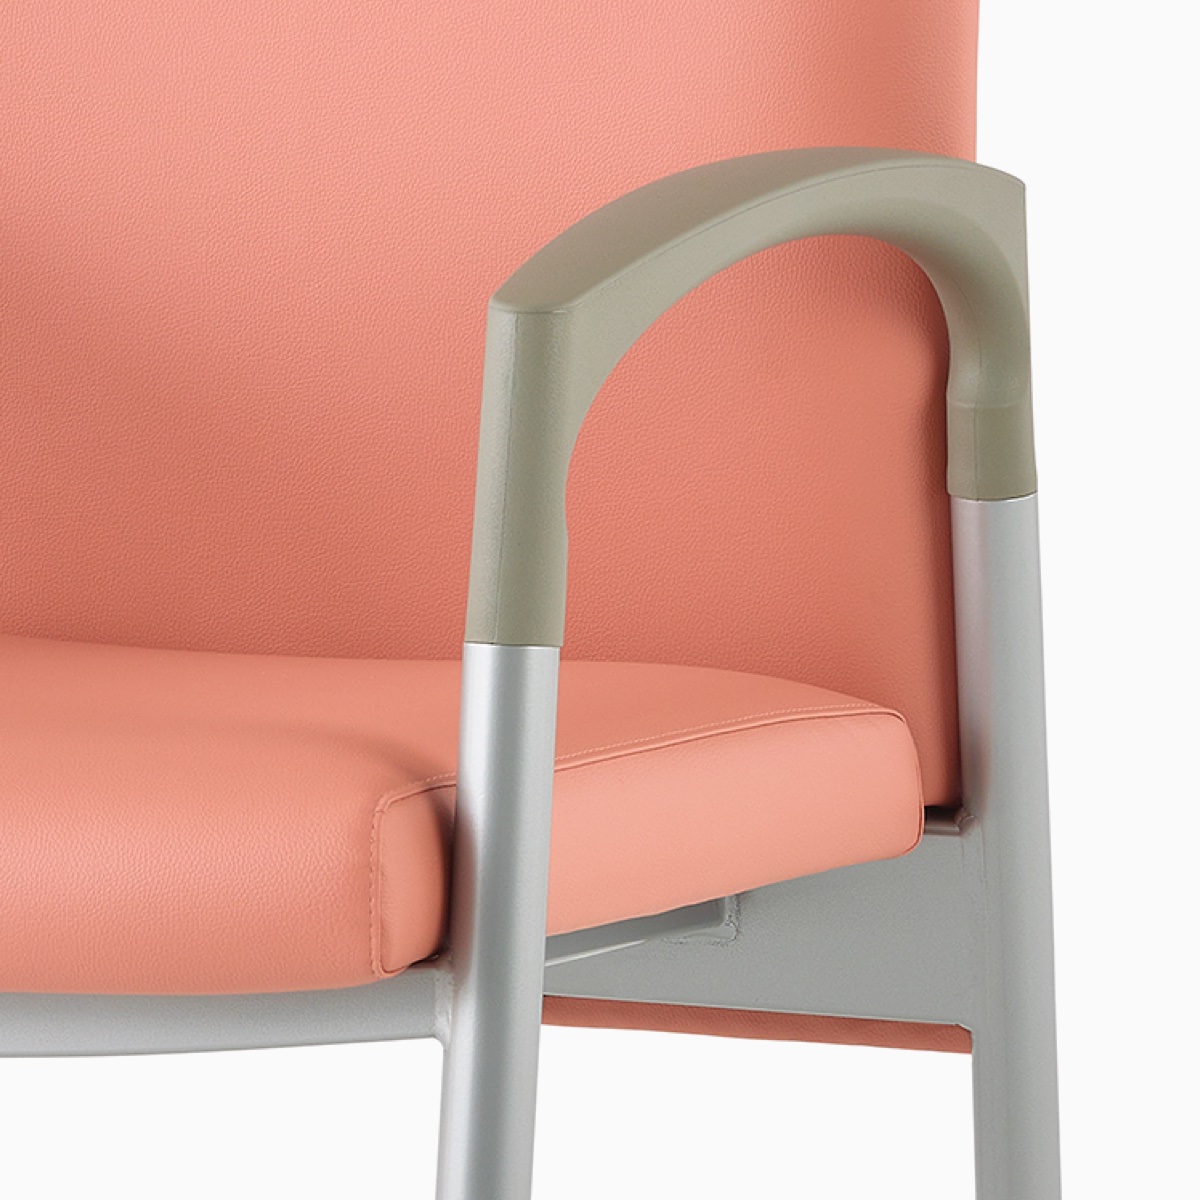 Detail of a silver frame and pewter armcap on a Valor Patient Chair upholstered in salmon.